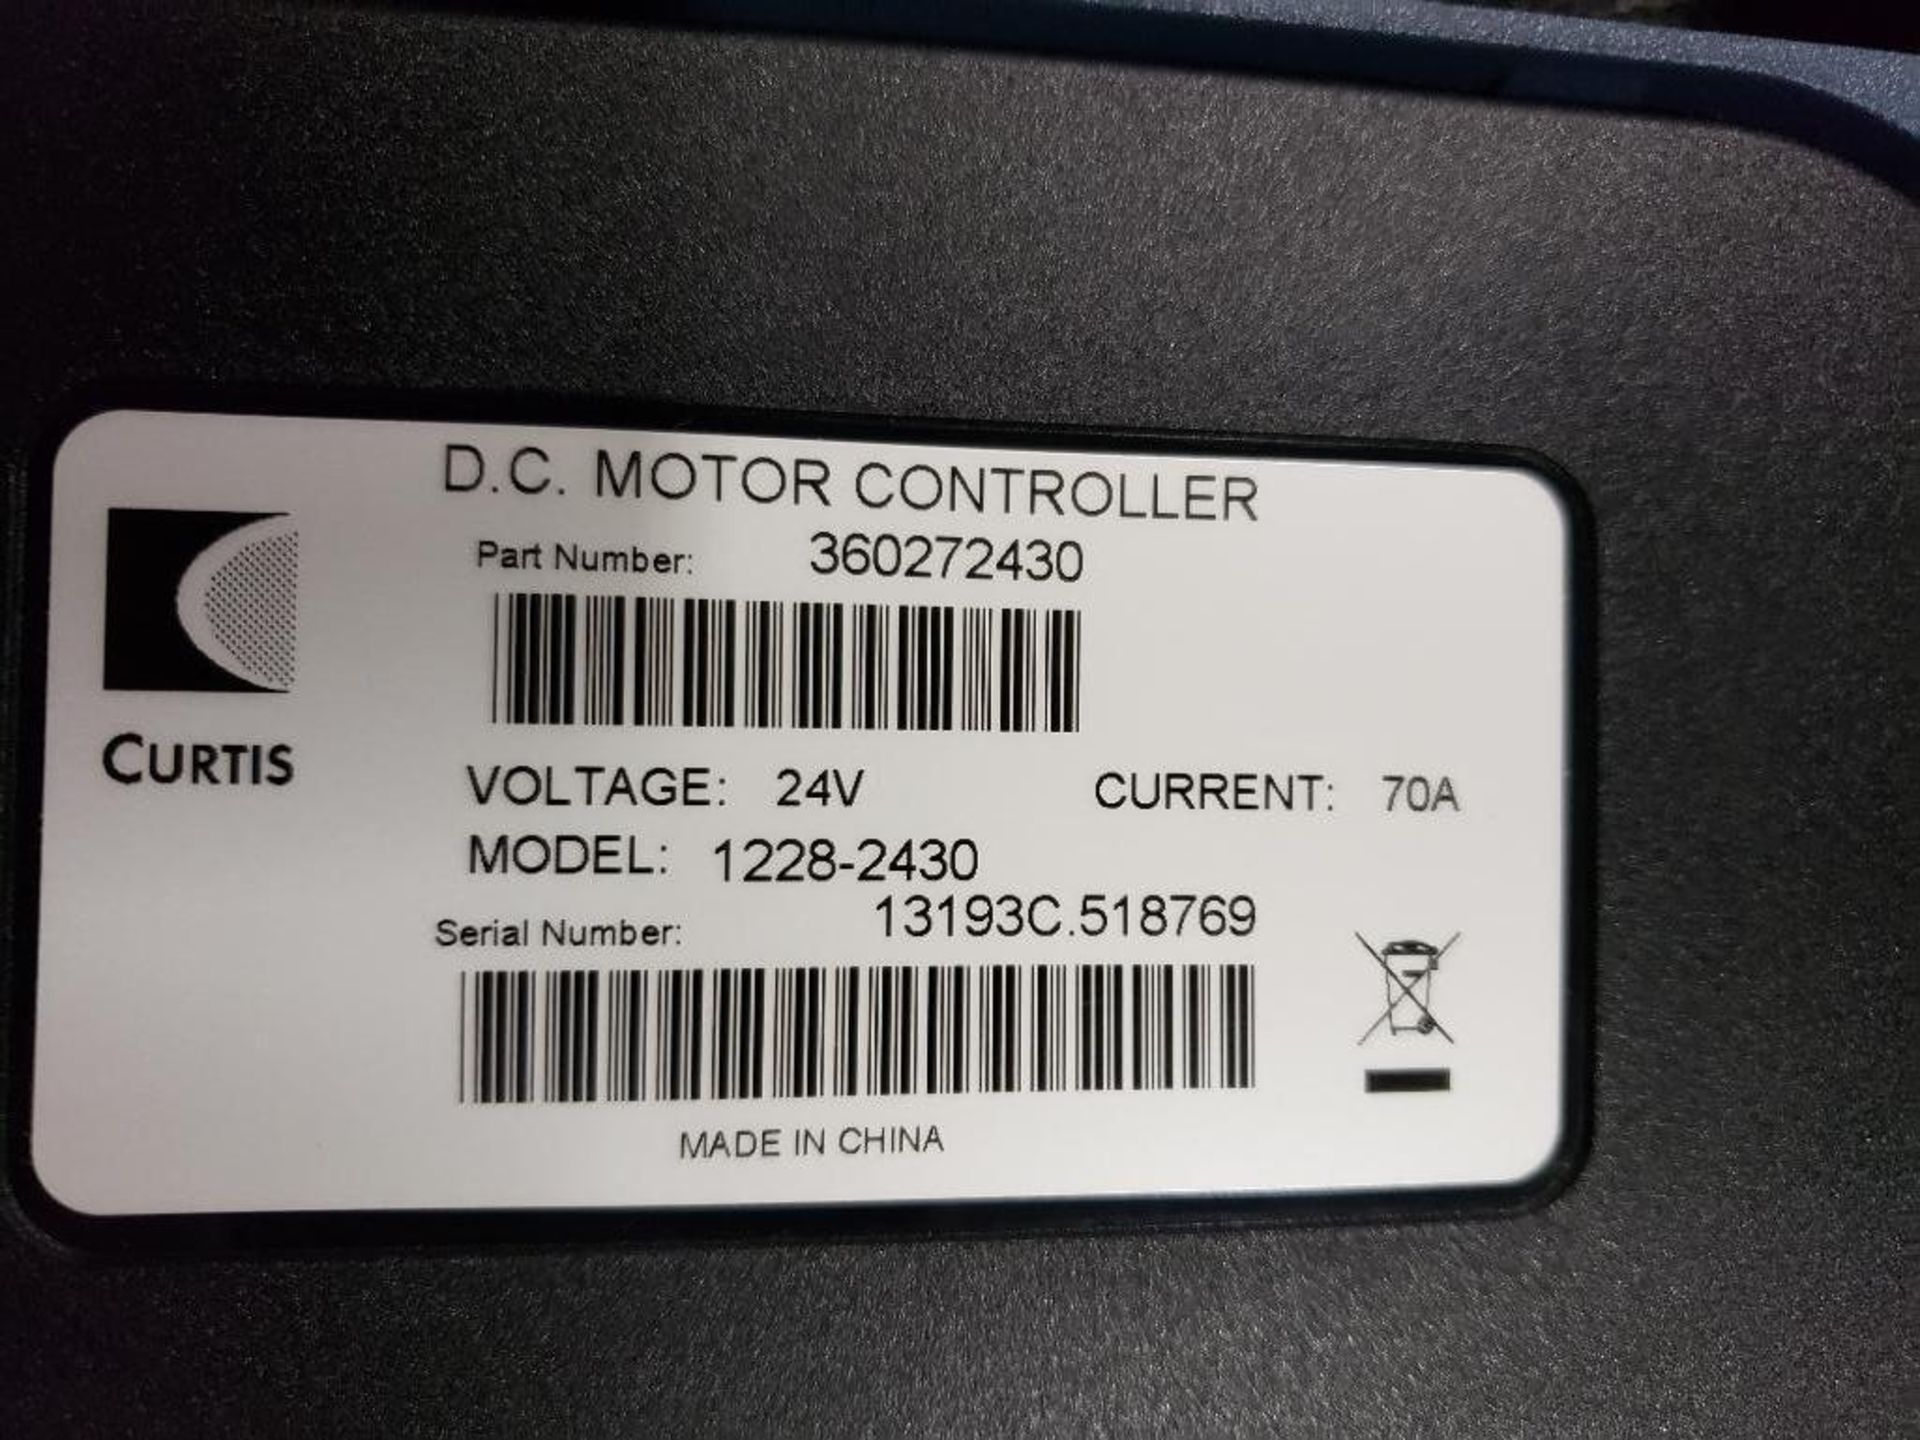 Qty 2 - Curtis 1228-2430 D.C. Motor controller. - Image 3 of 3